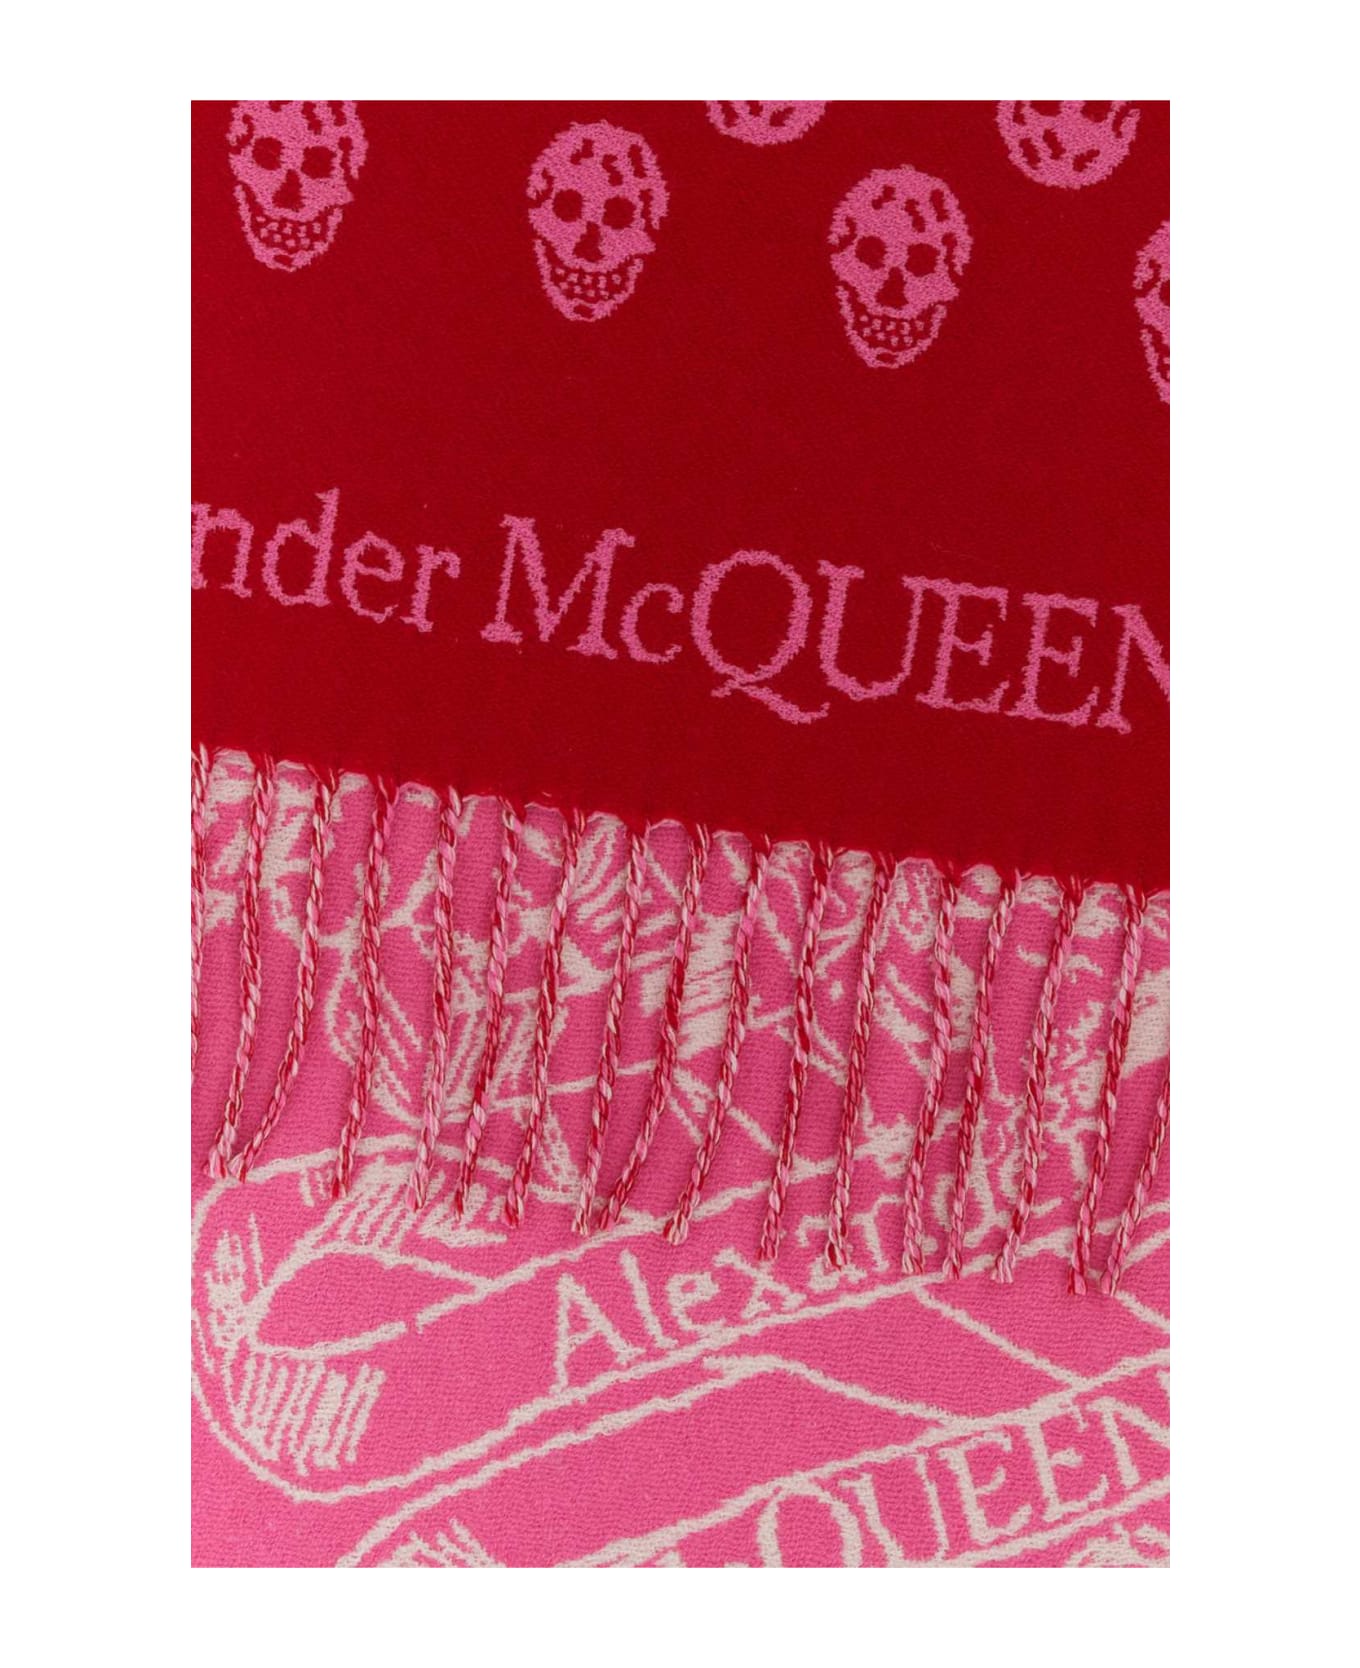 Alexander McQueen Embroidered Wool Reversible Scarf - WELSHREDPSYCPINK